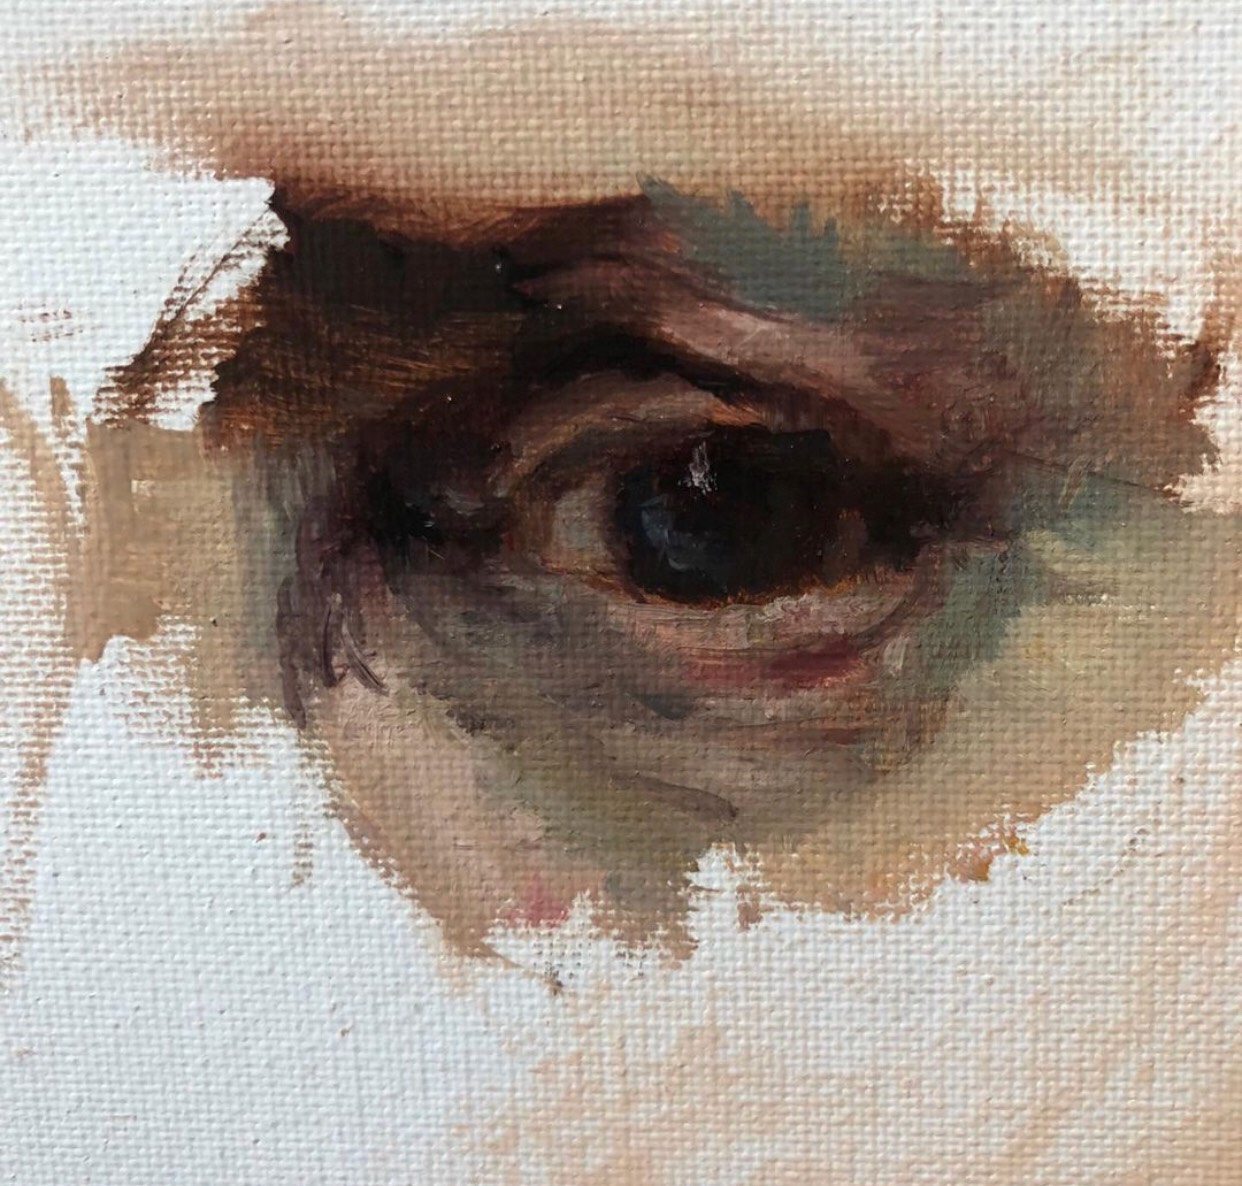 How to paint realistic eyes